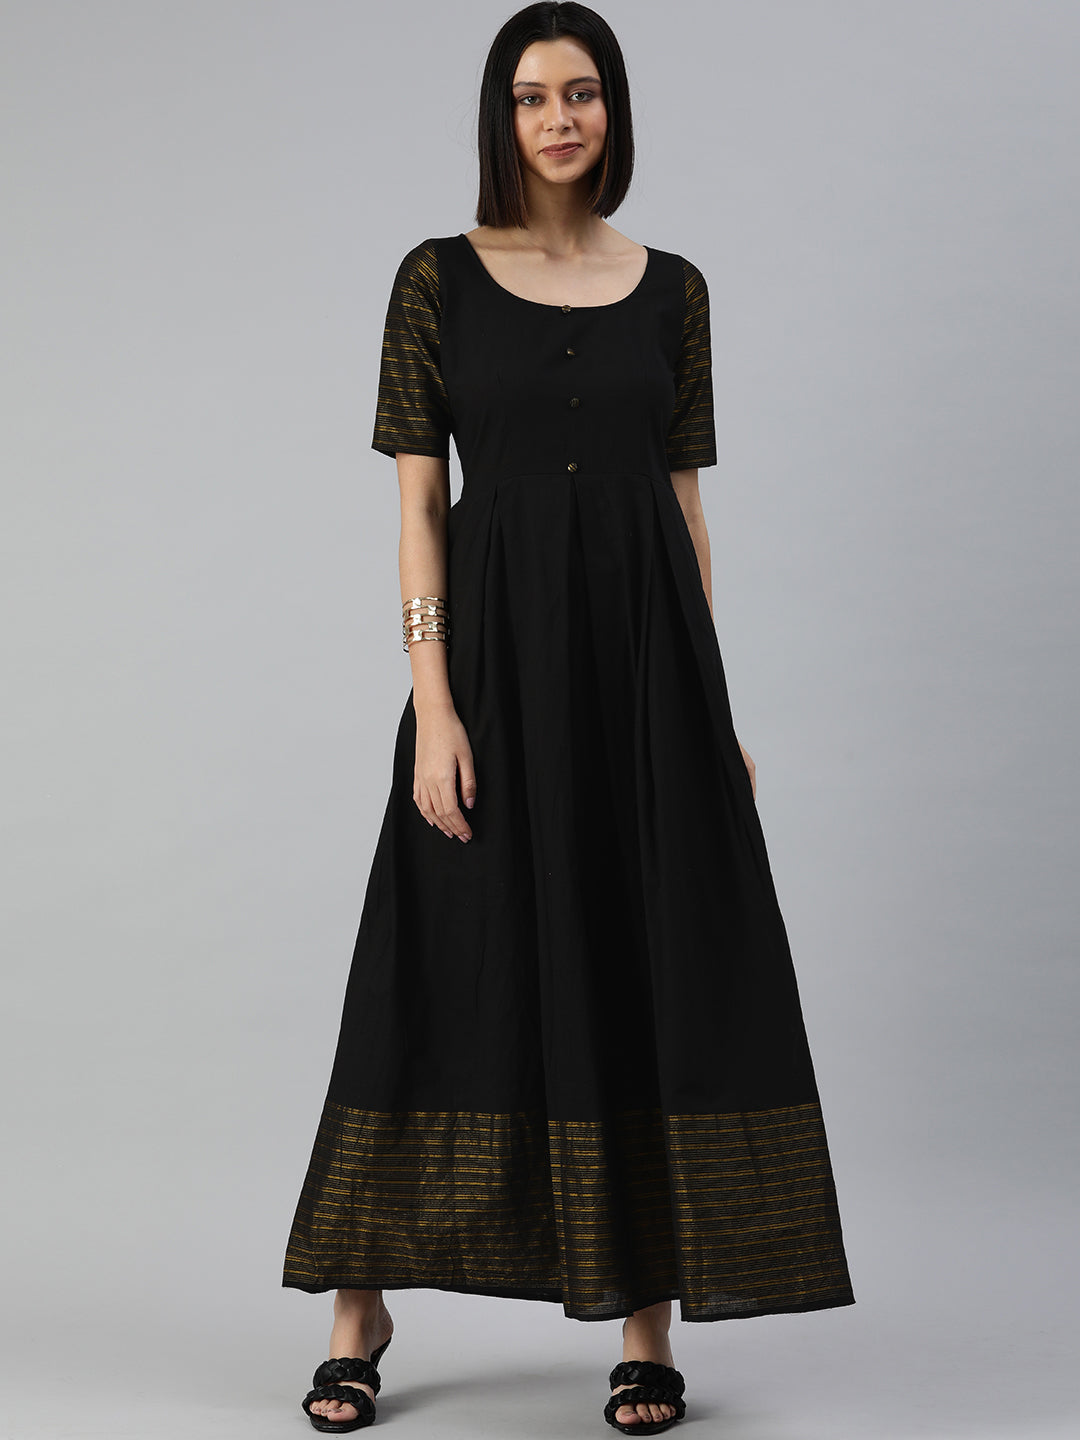 A-line dress with Pleated Yoke embellished with delicate handwork –  HandPicked Fashions